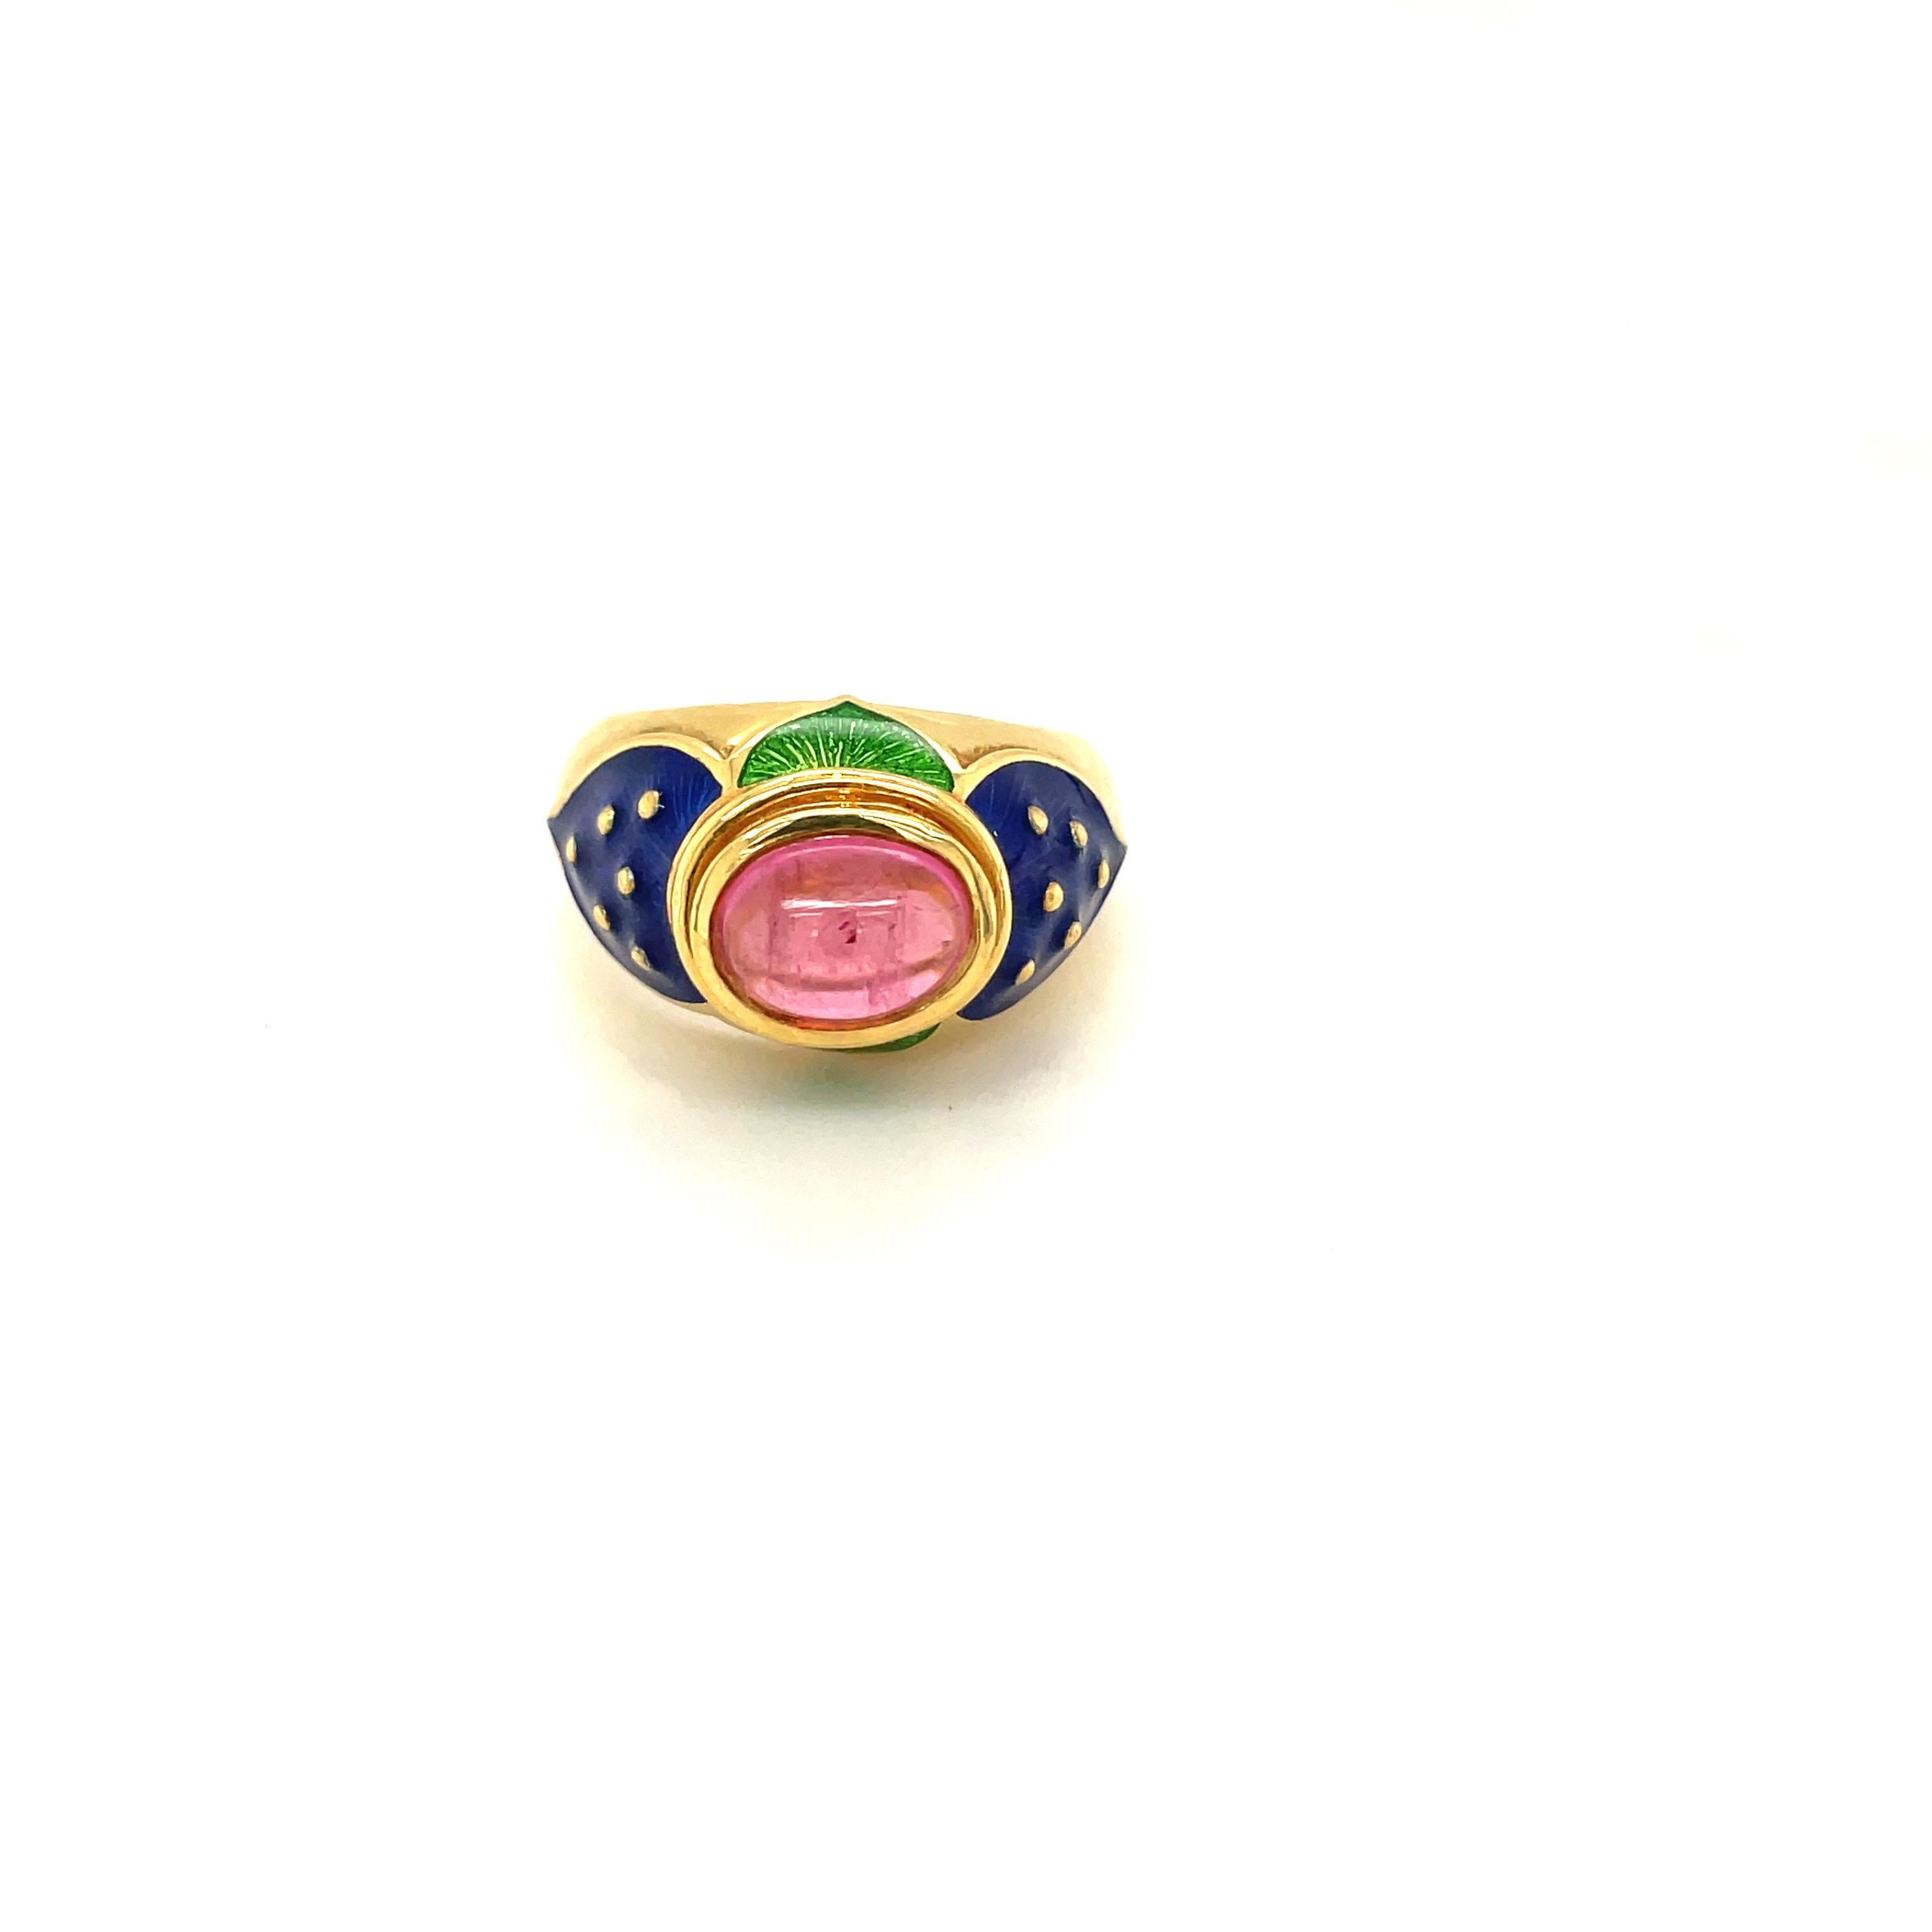 Cellini 18KT YG Ring with Cabochon Pink Tourmaline Center & Blue & Green Enamel For Sale 1